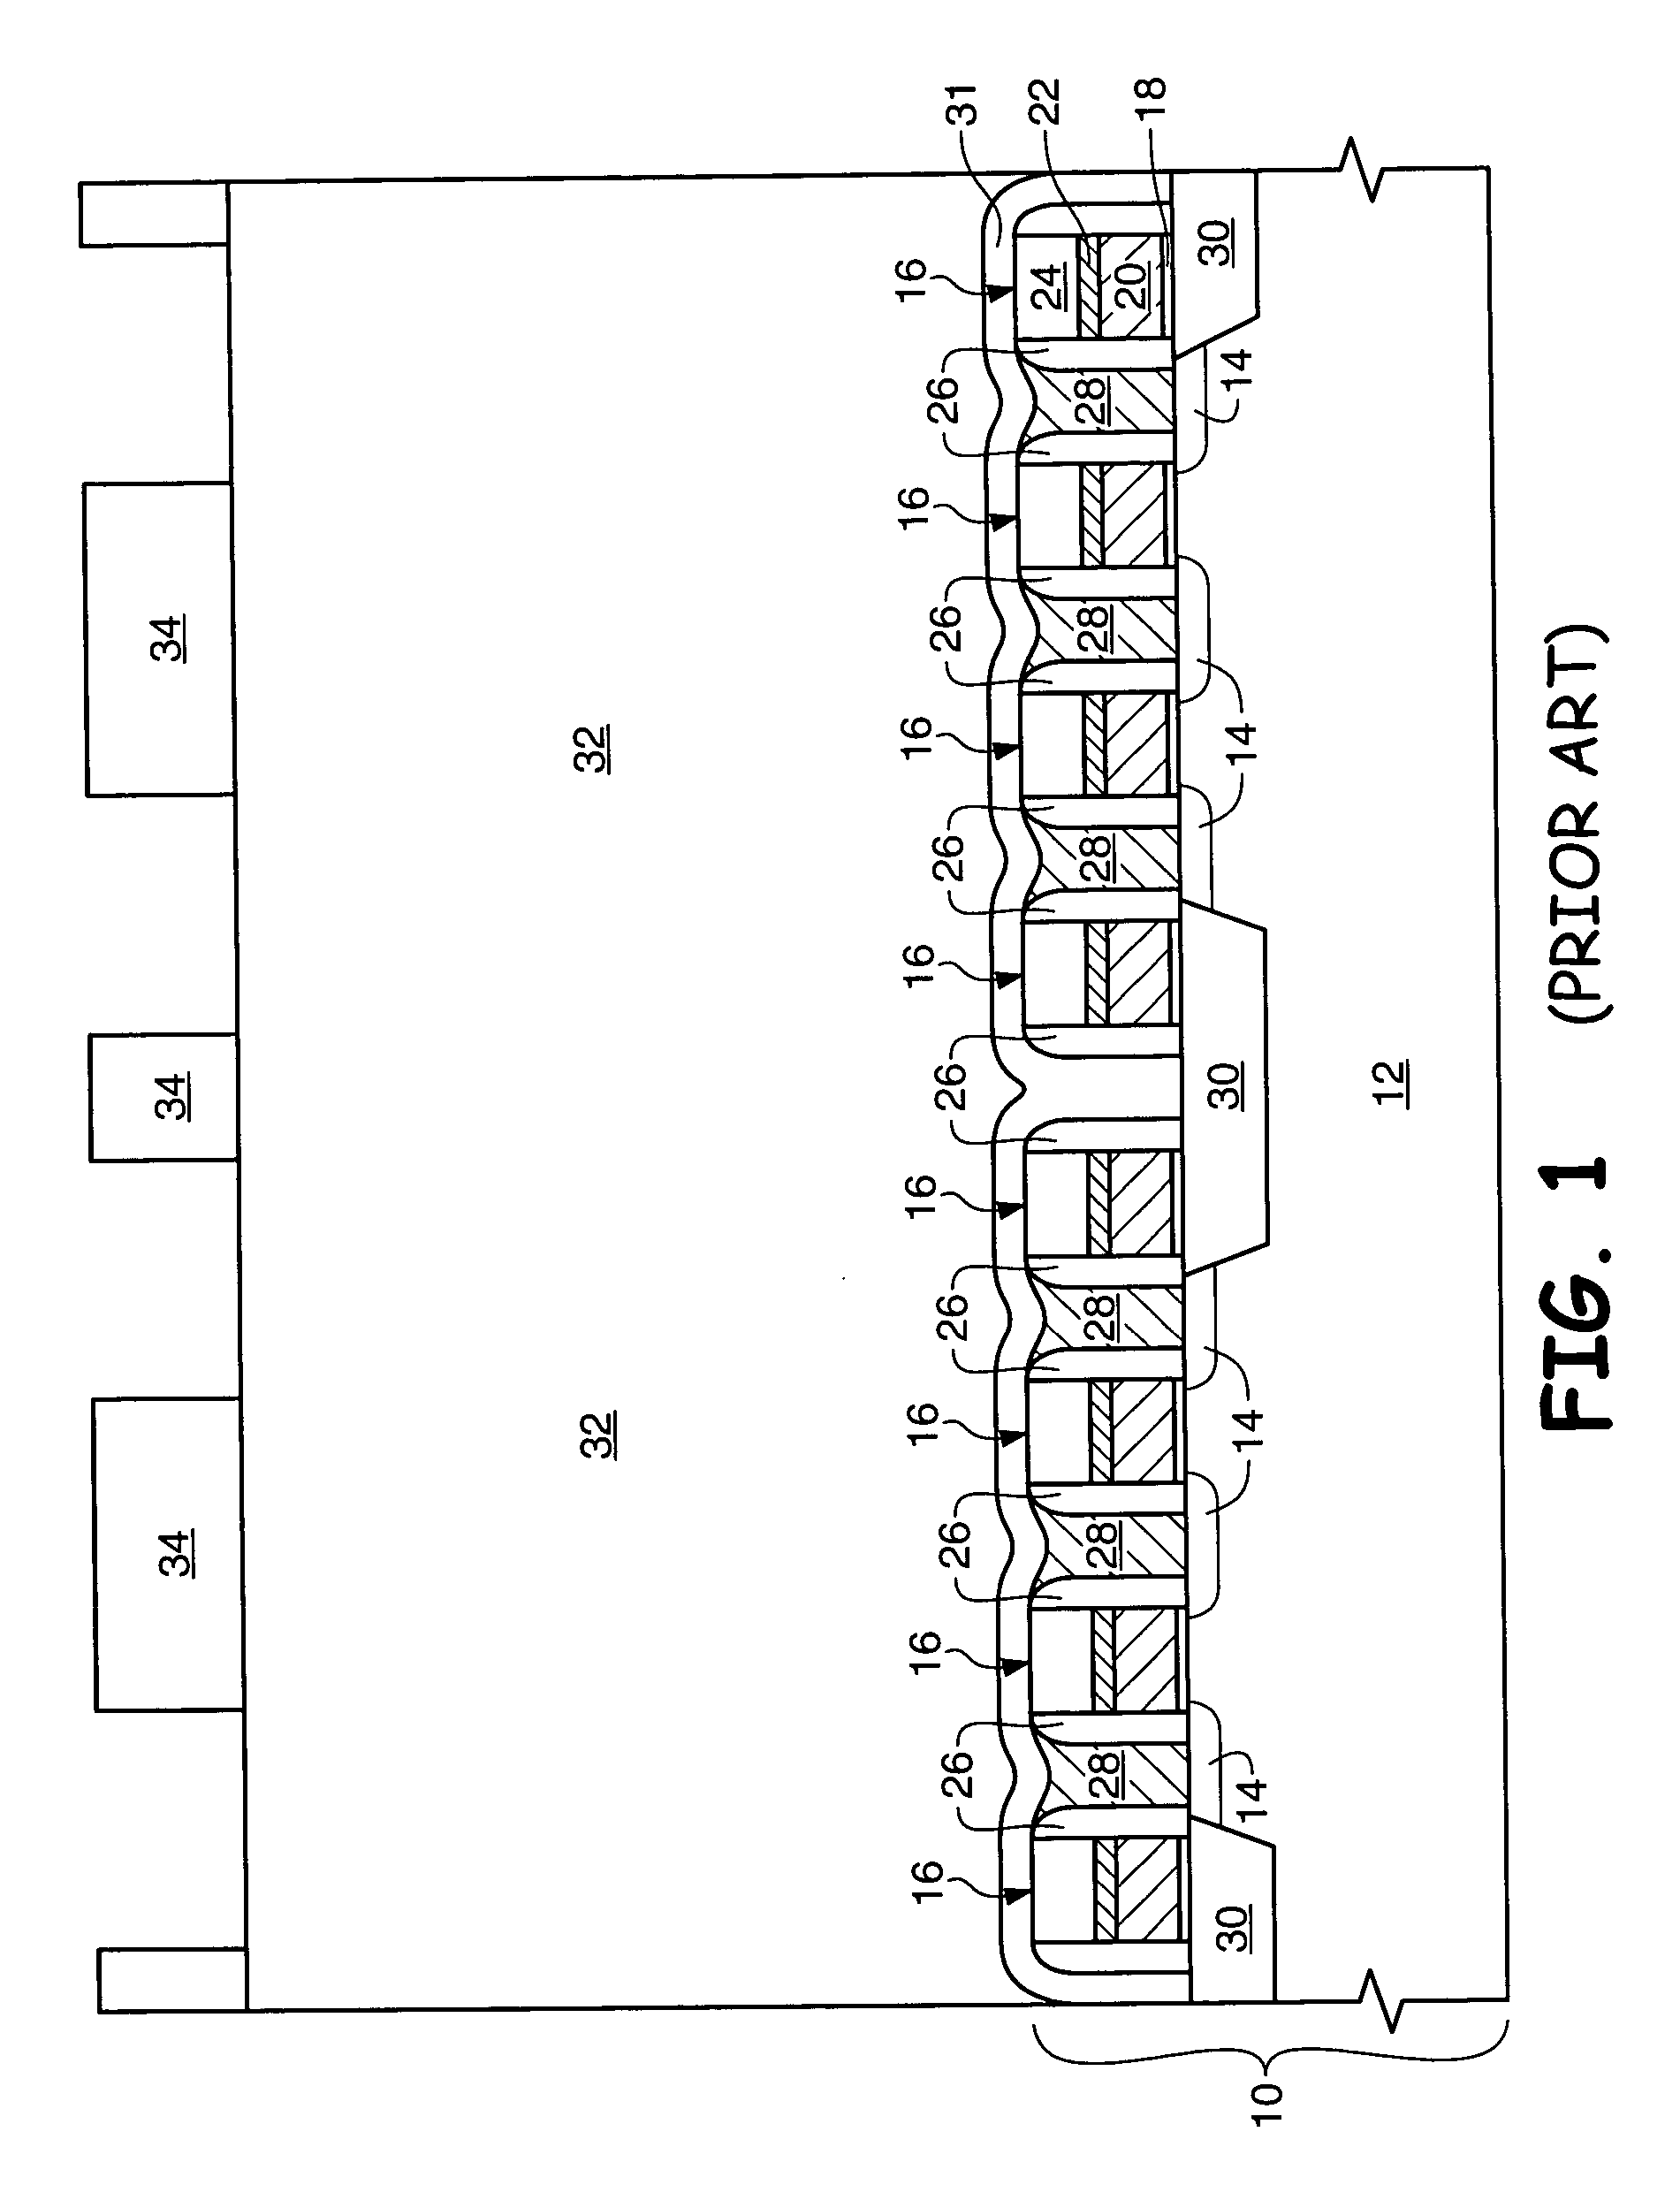 Support for vertically oriented capacitors during the formation of a semiconductor device